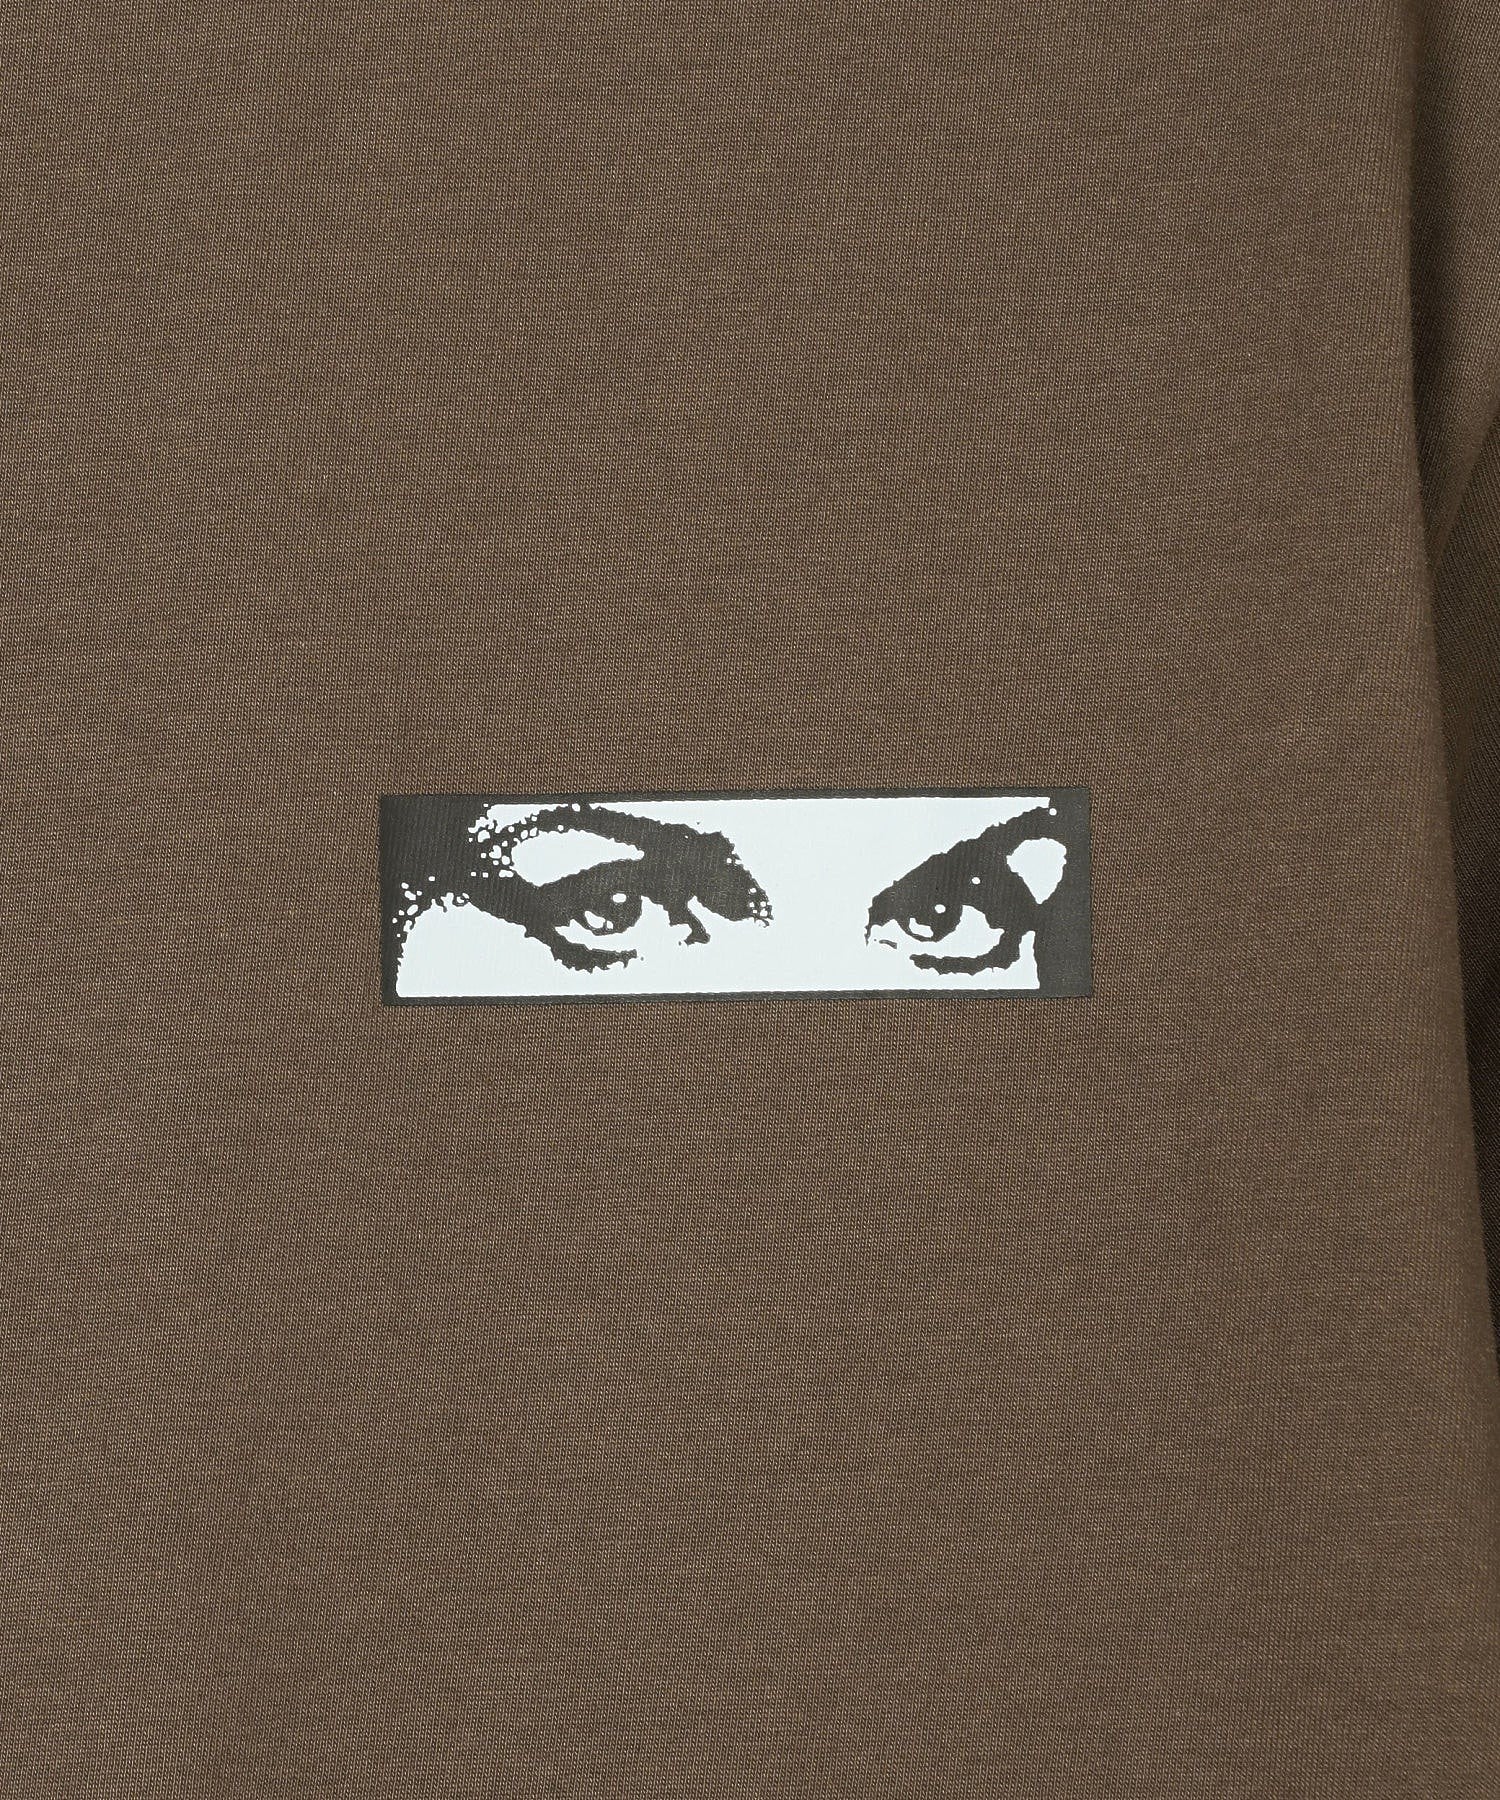 PERKS AND MINI/パークスアンドミニ/FLOATING EYES SS TEE/1509/F